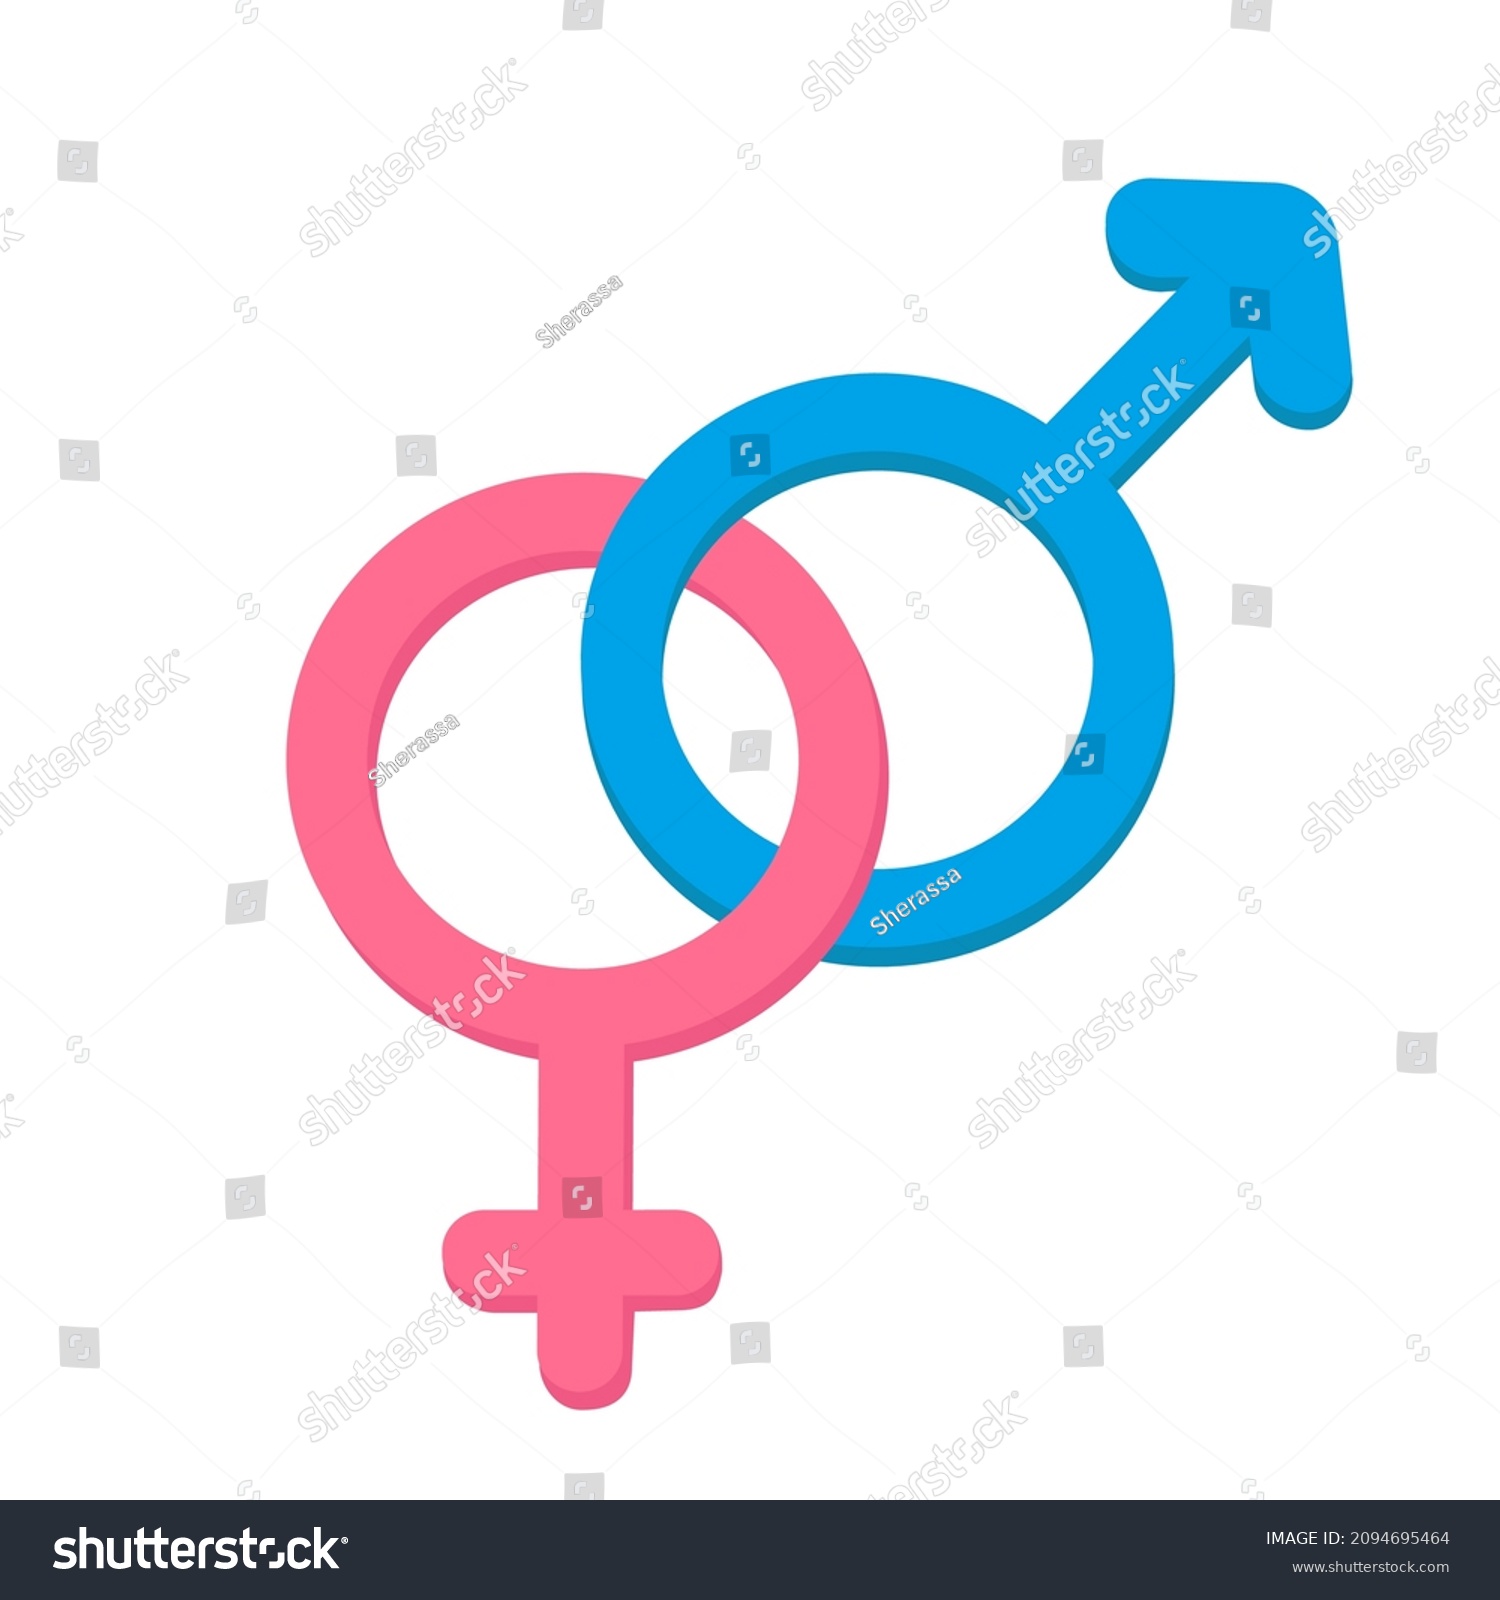 Vector Illustration Pink Female Blue Male Stock Vector Royalty Free 2094695464 Shutterstock